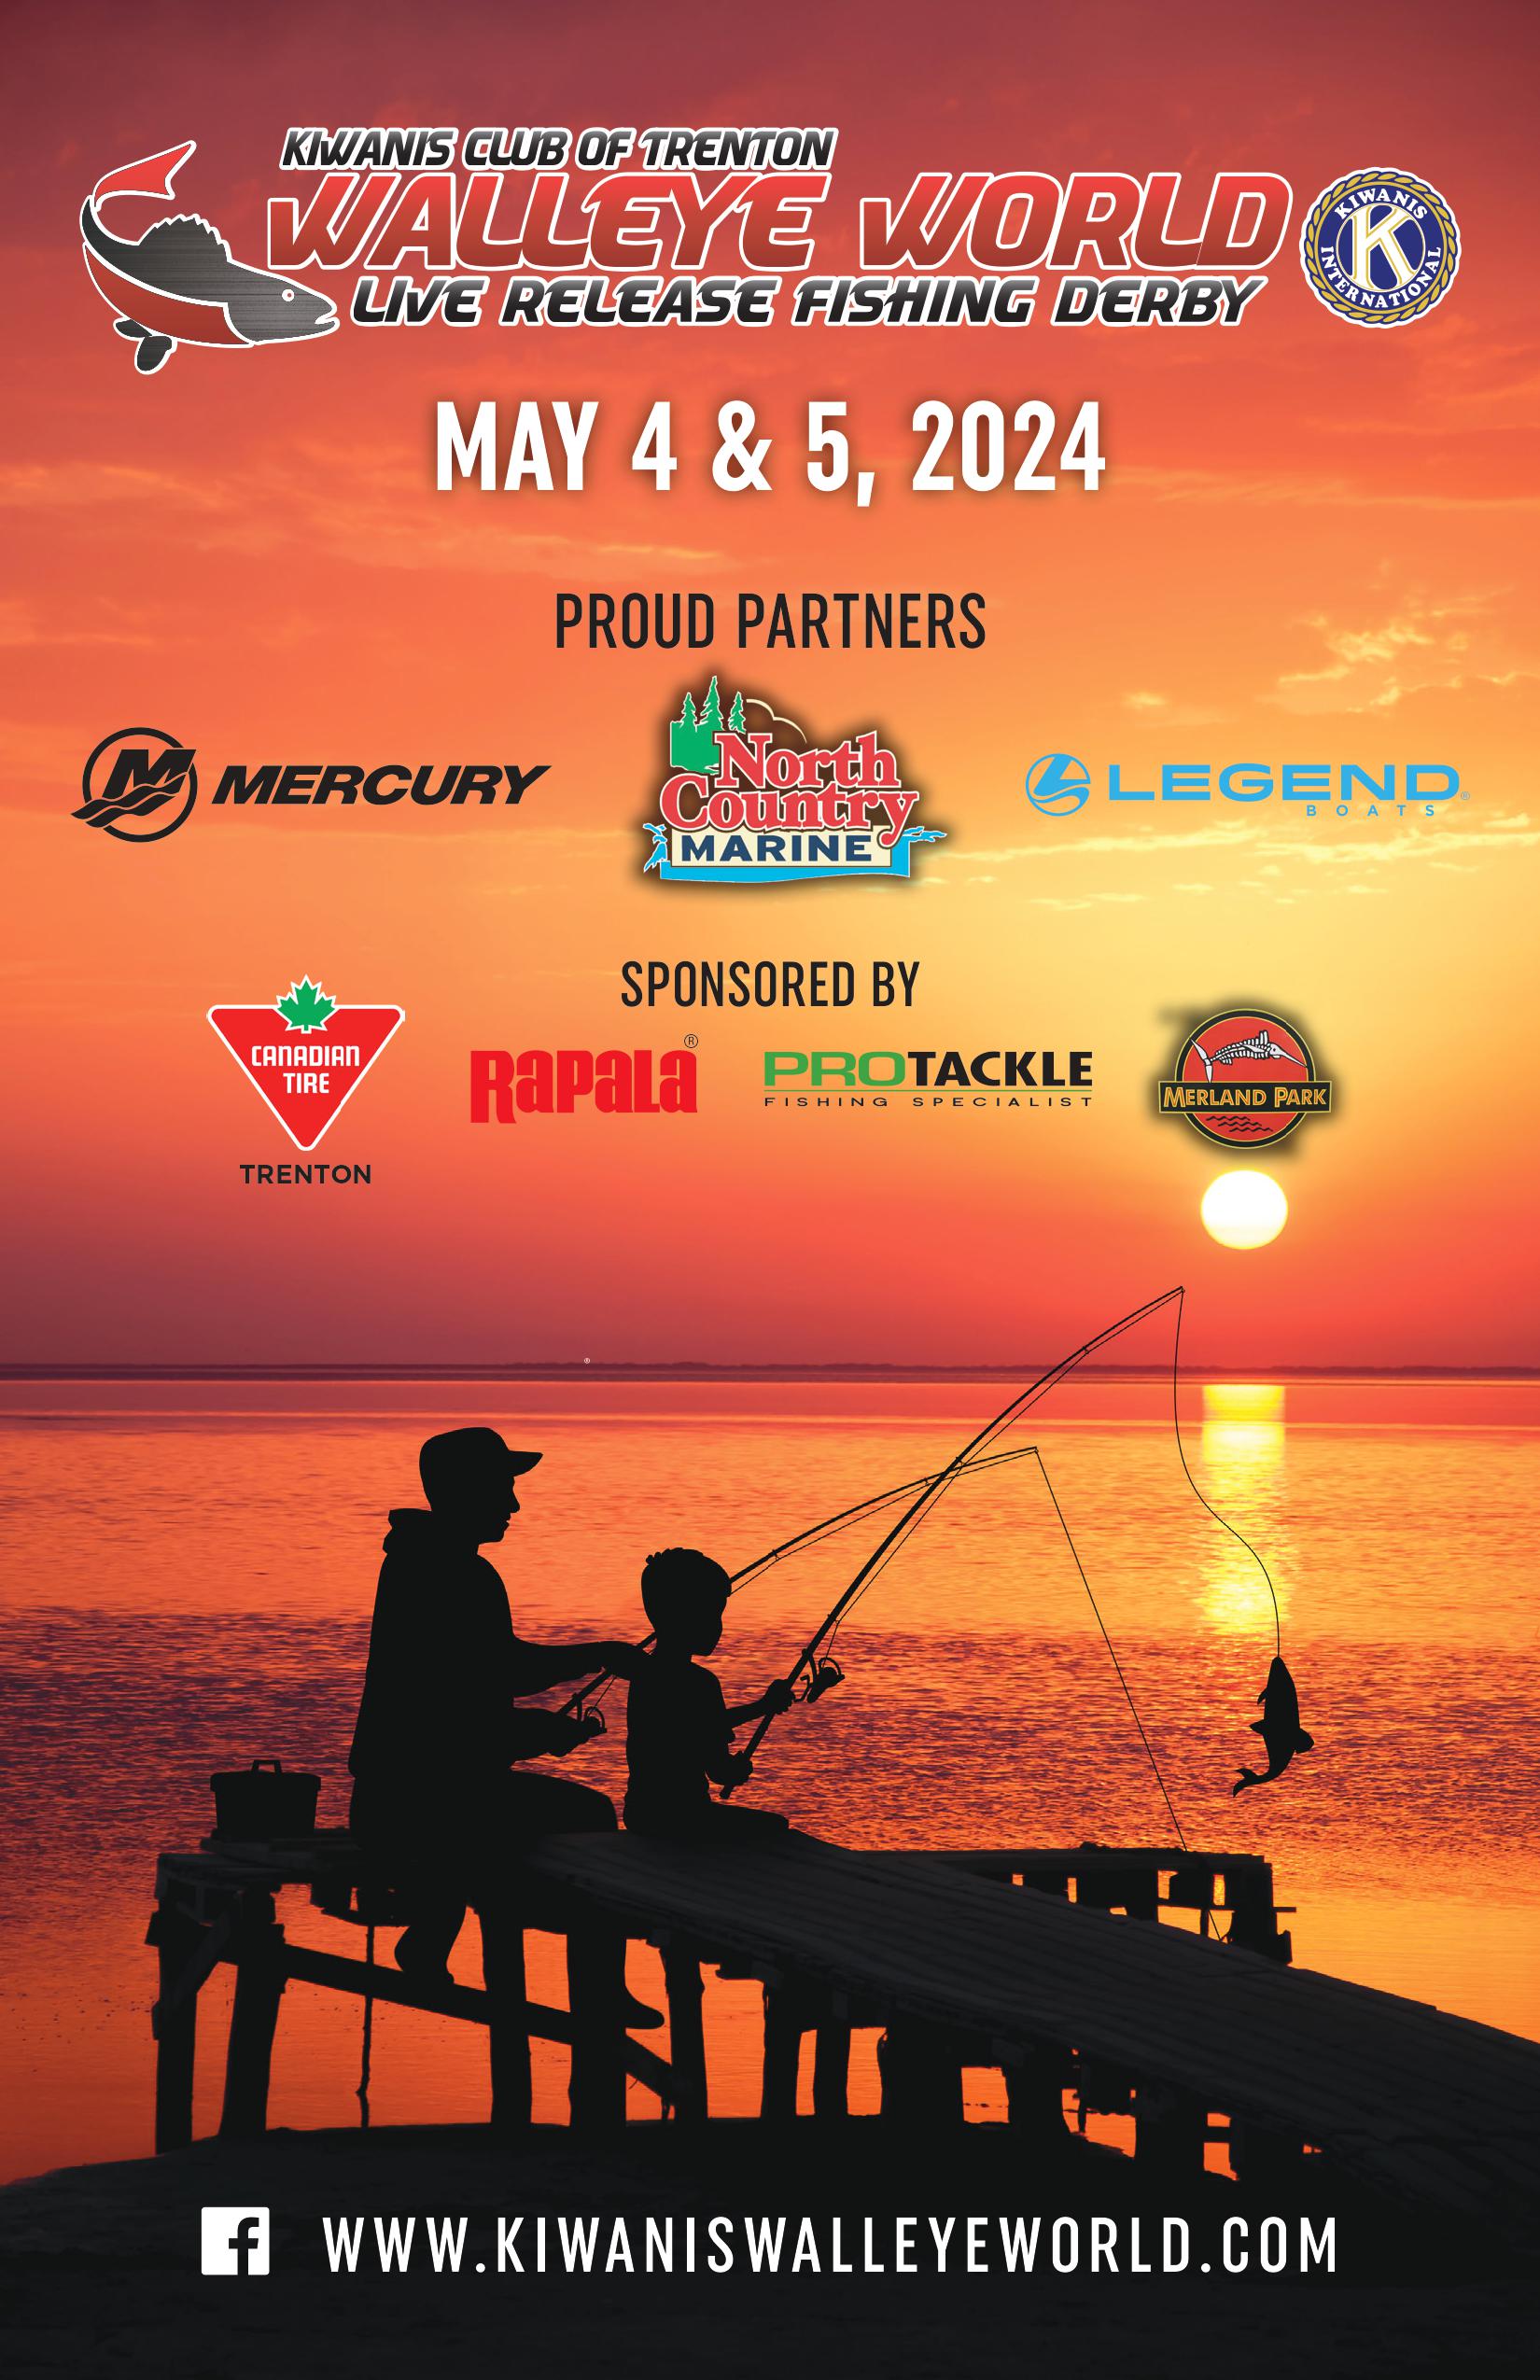 5 THINGS TO KNOW: How to register for a free fishing tournament